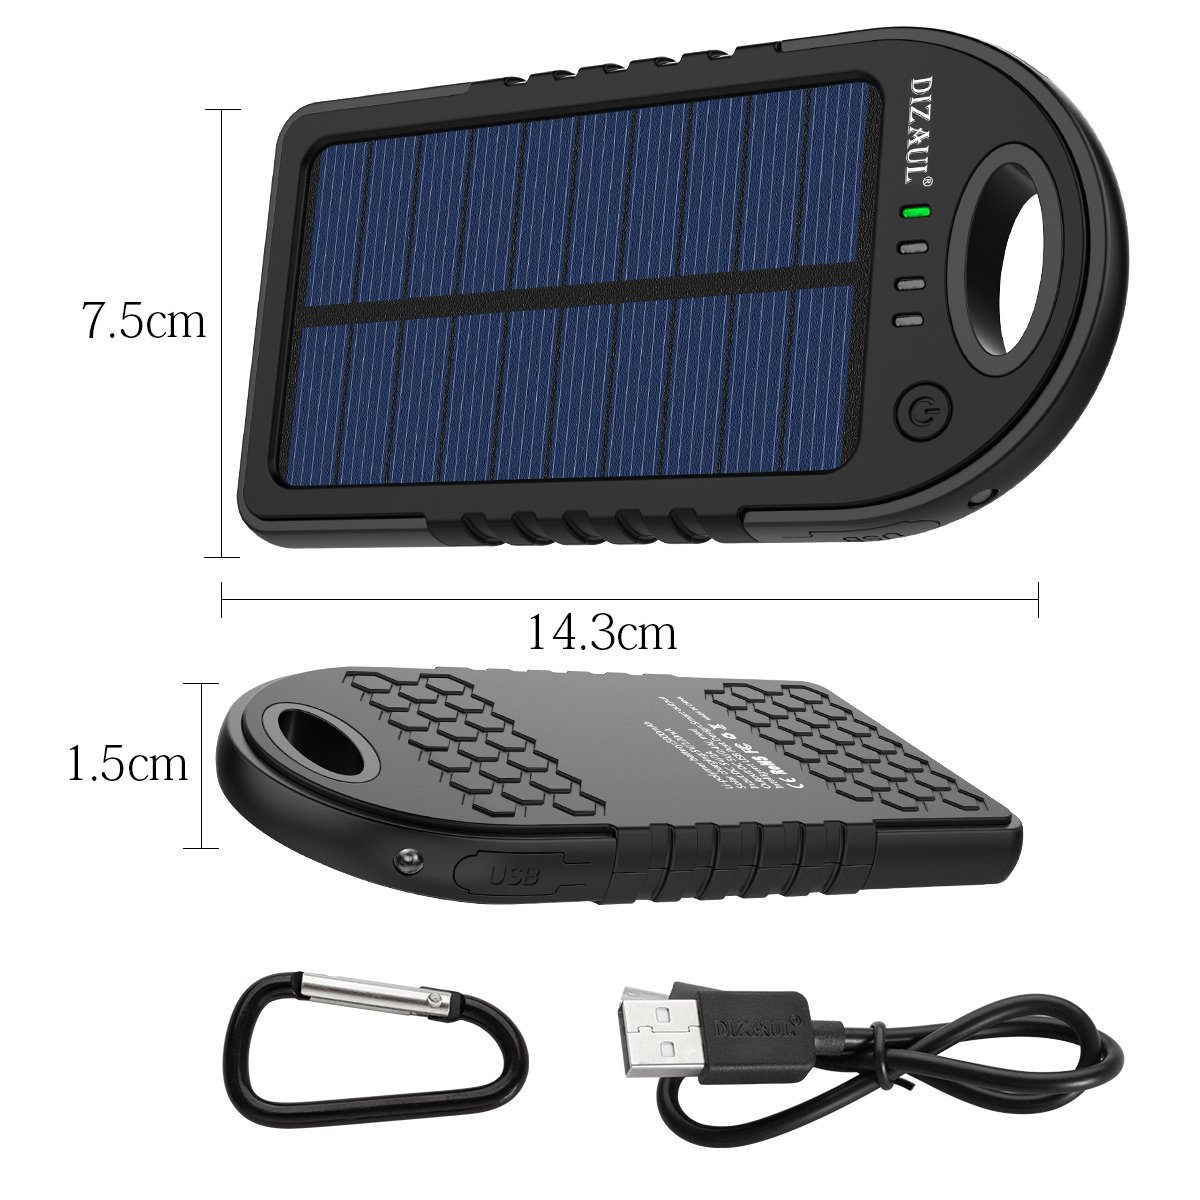 Dizaul Solar Charger, 5000mAh Portable Solar Power Bank Waterproof/Shockproof/Dustproof Dual USB Battery Bank Compatible with Smartphones,iPhone,Samsung,Android Phones,Windows Phones,GoPro,GPS